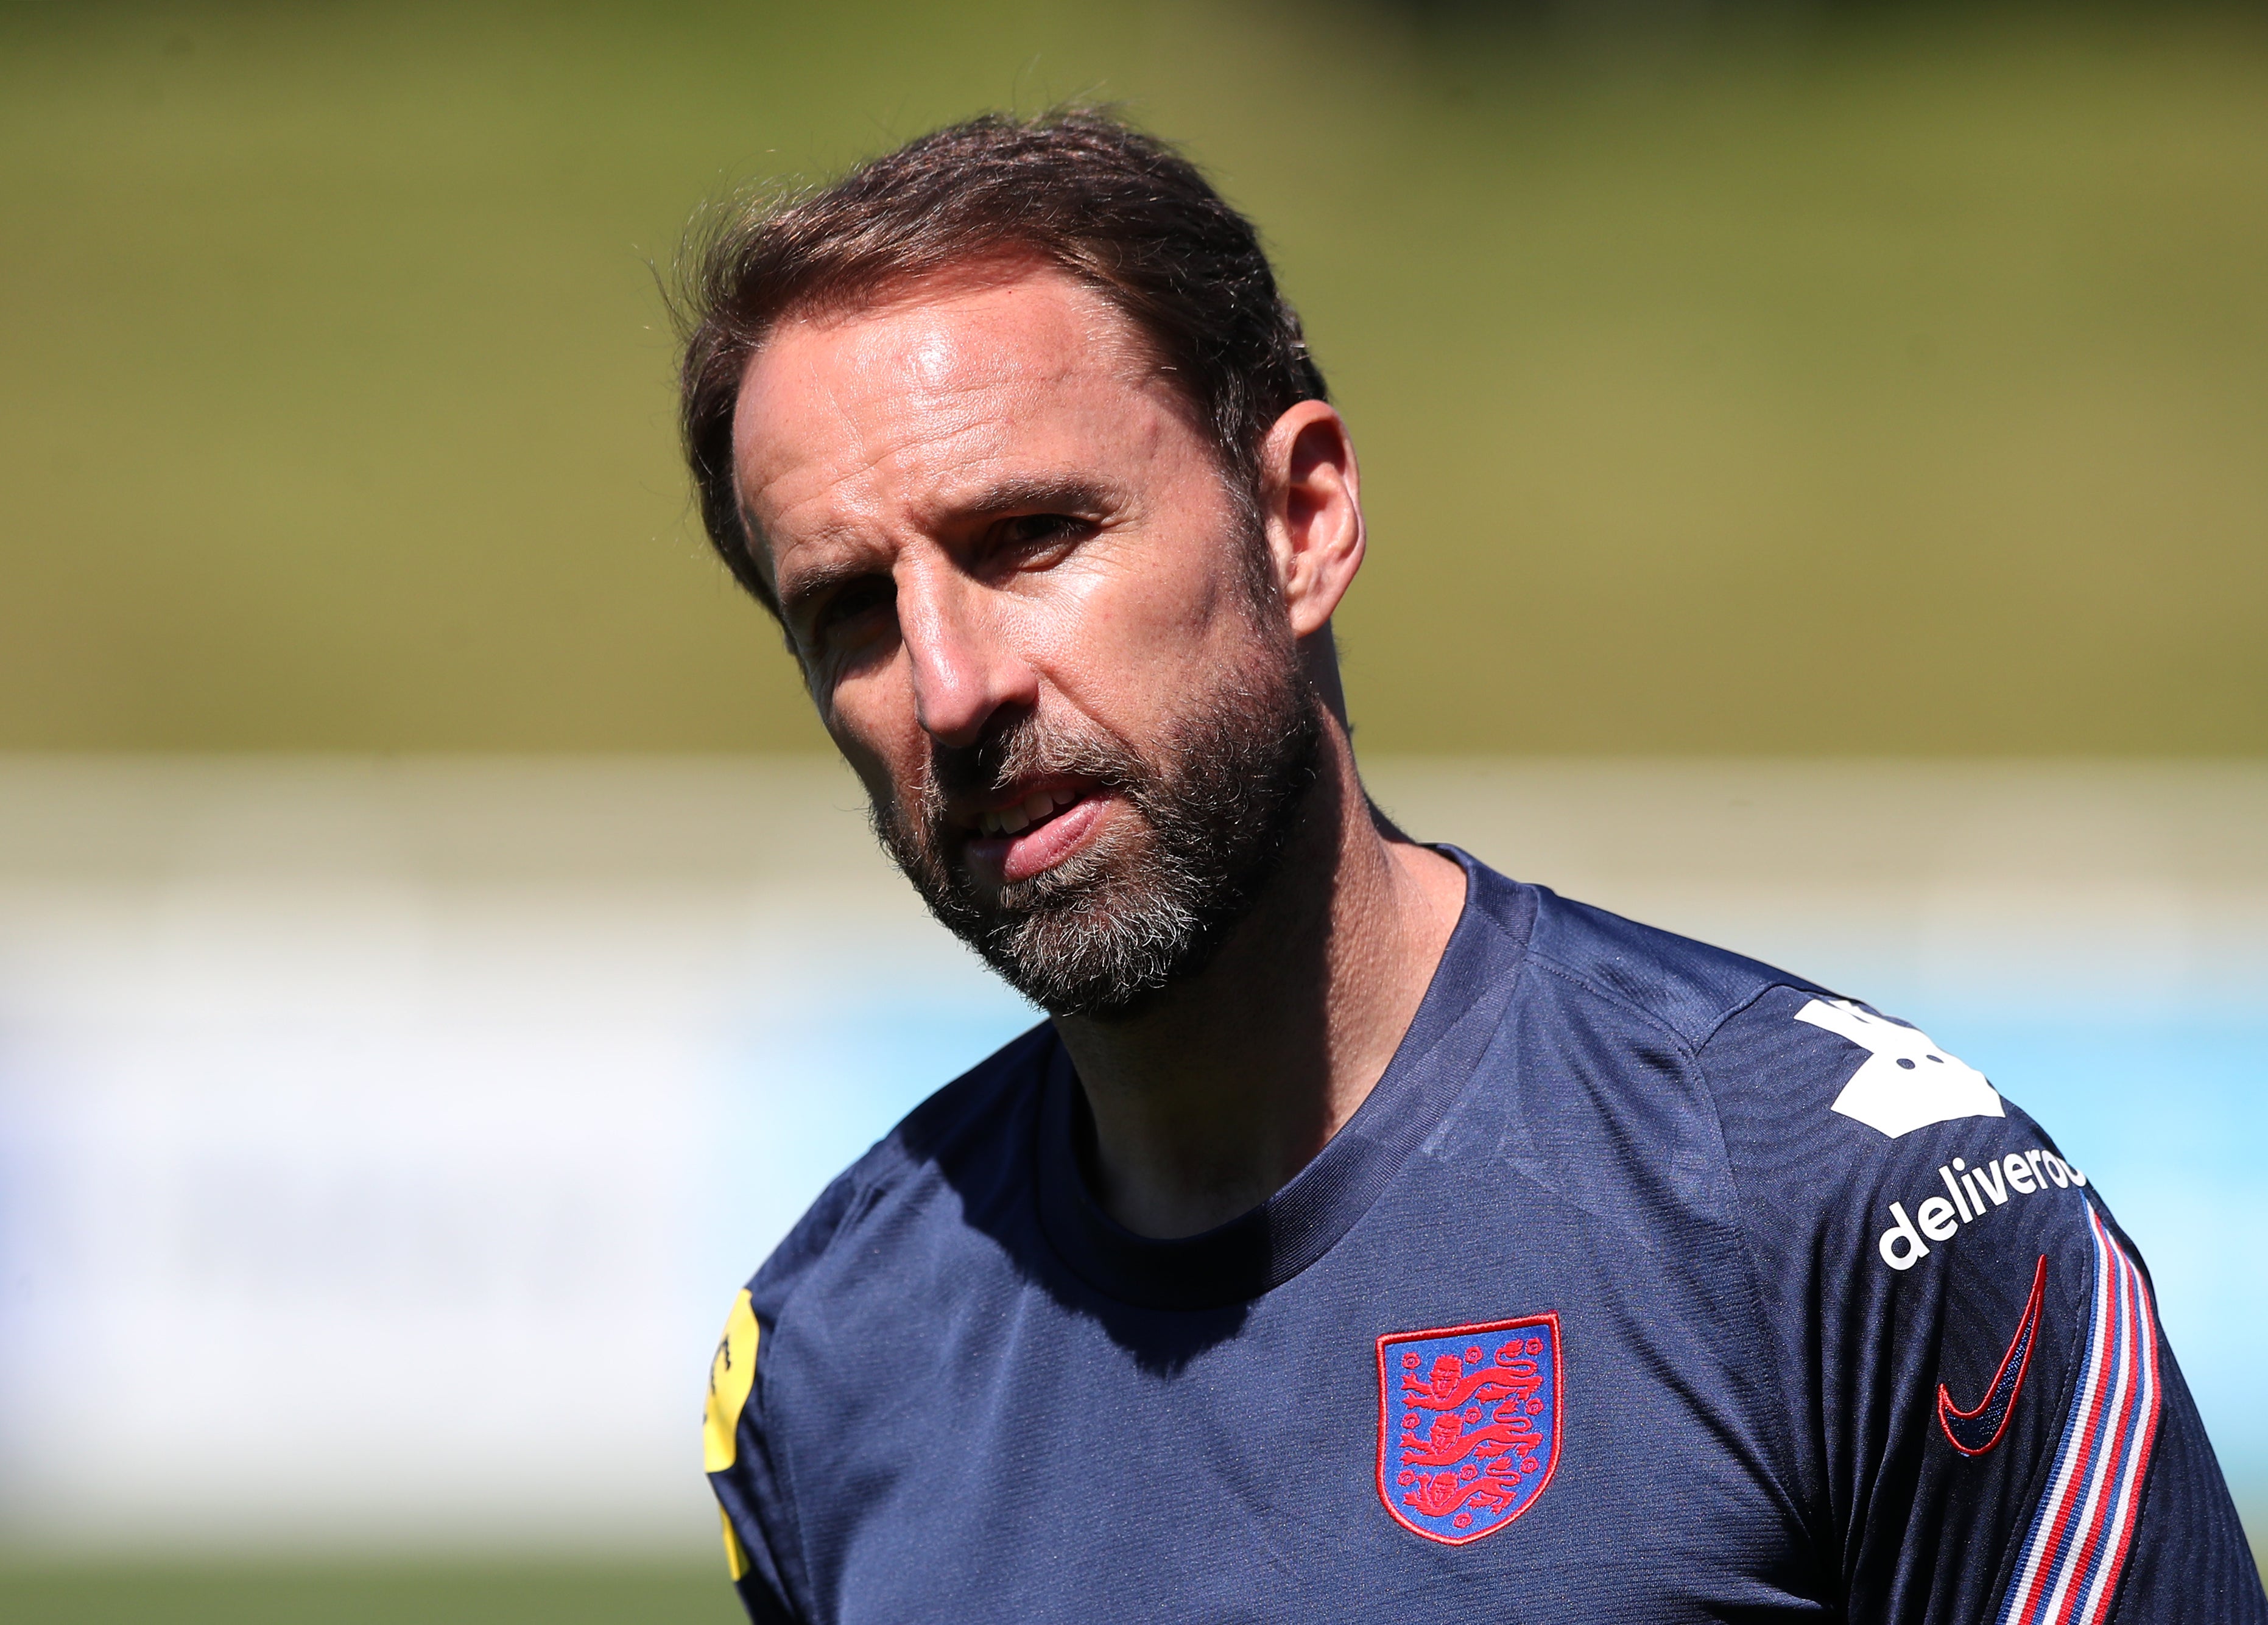 England manager Gareth Southgate has transformed the fortunes of the national team